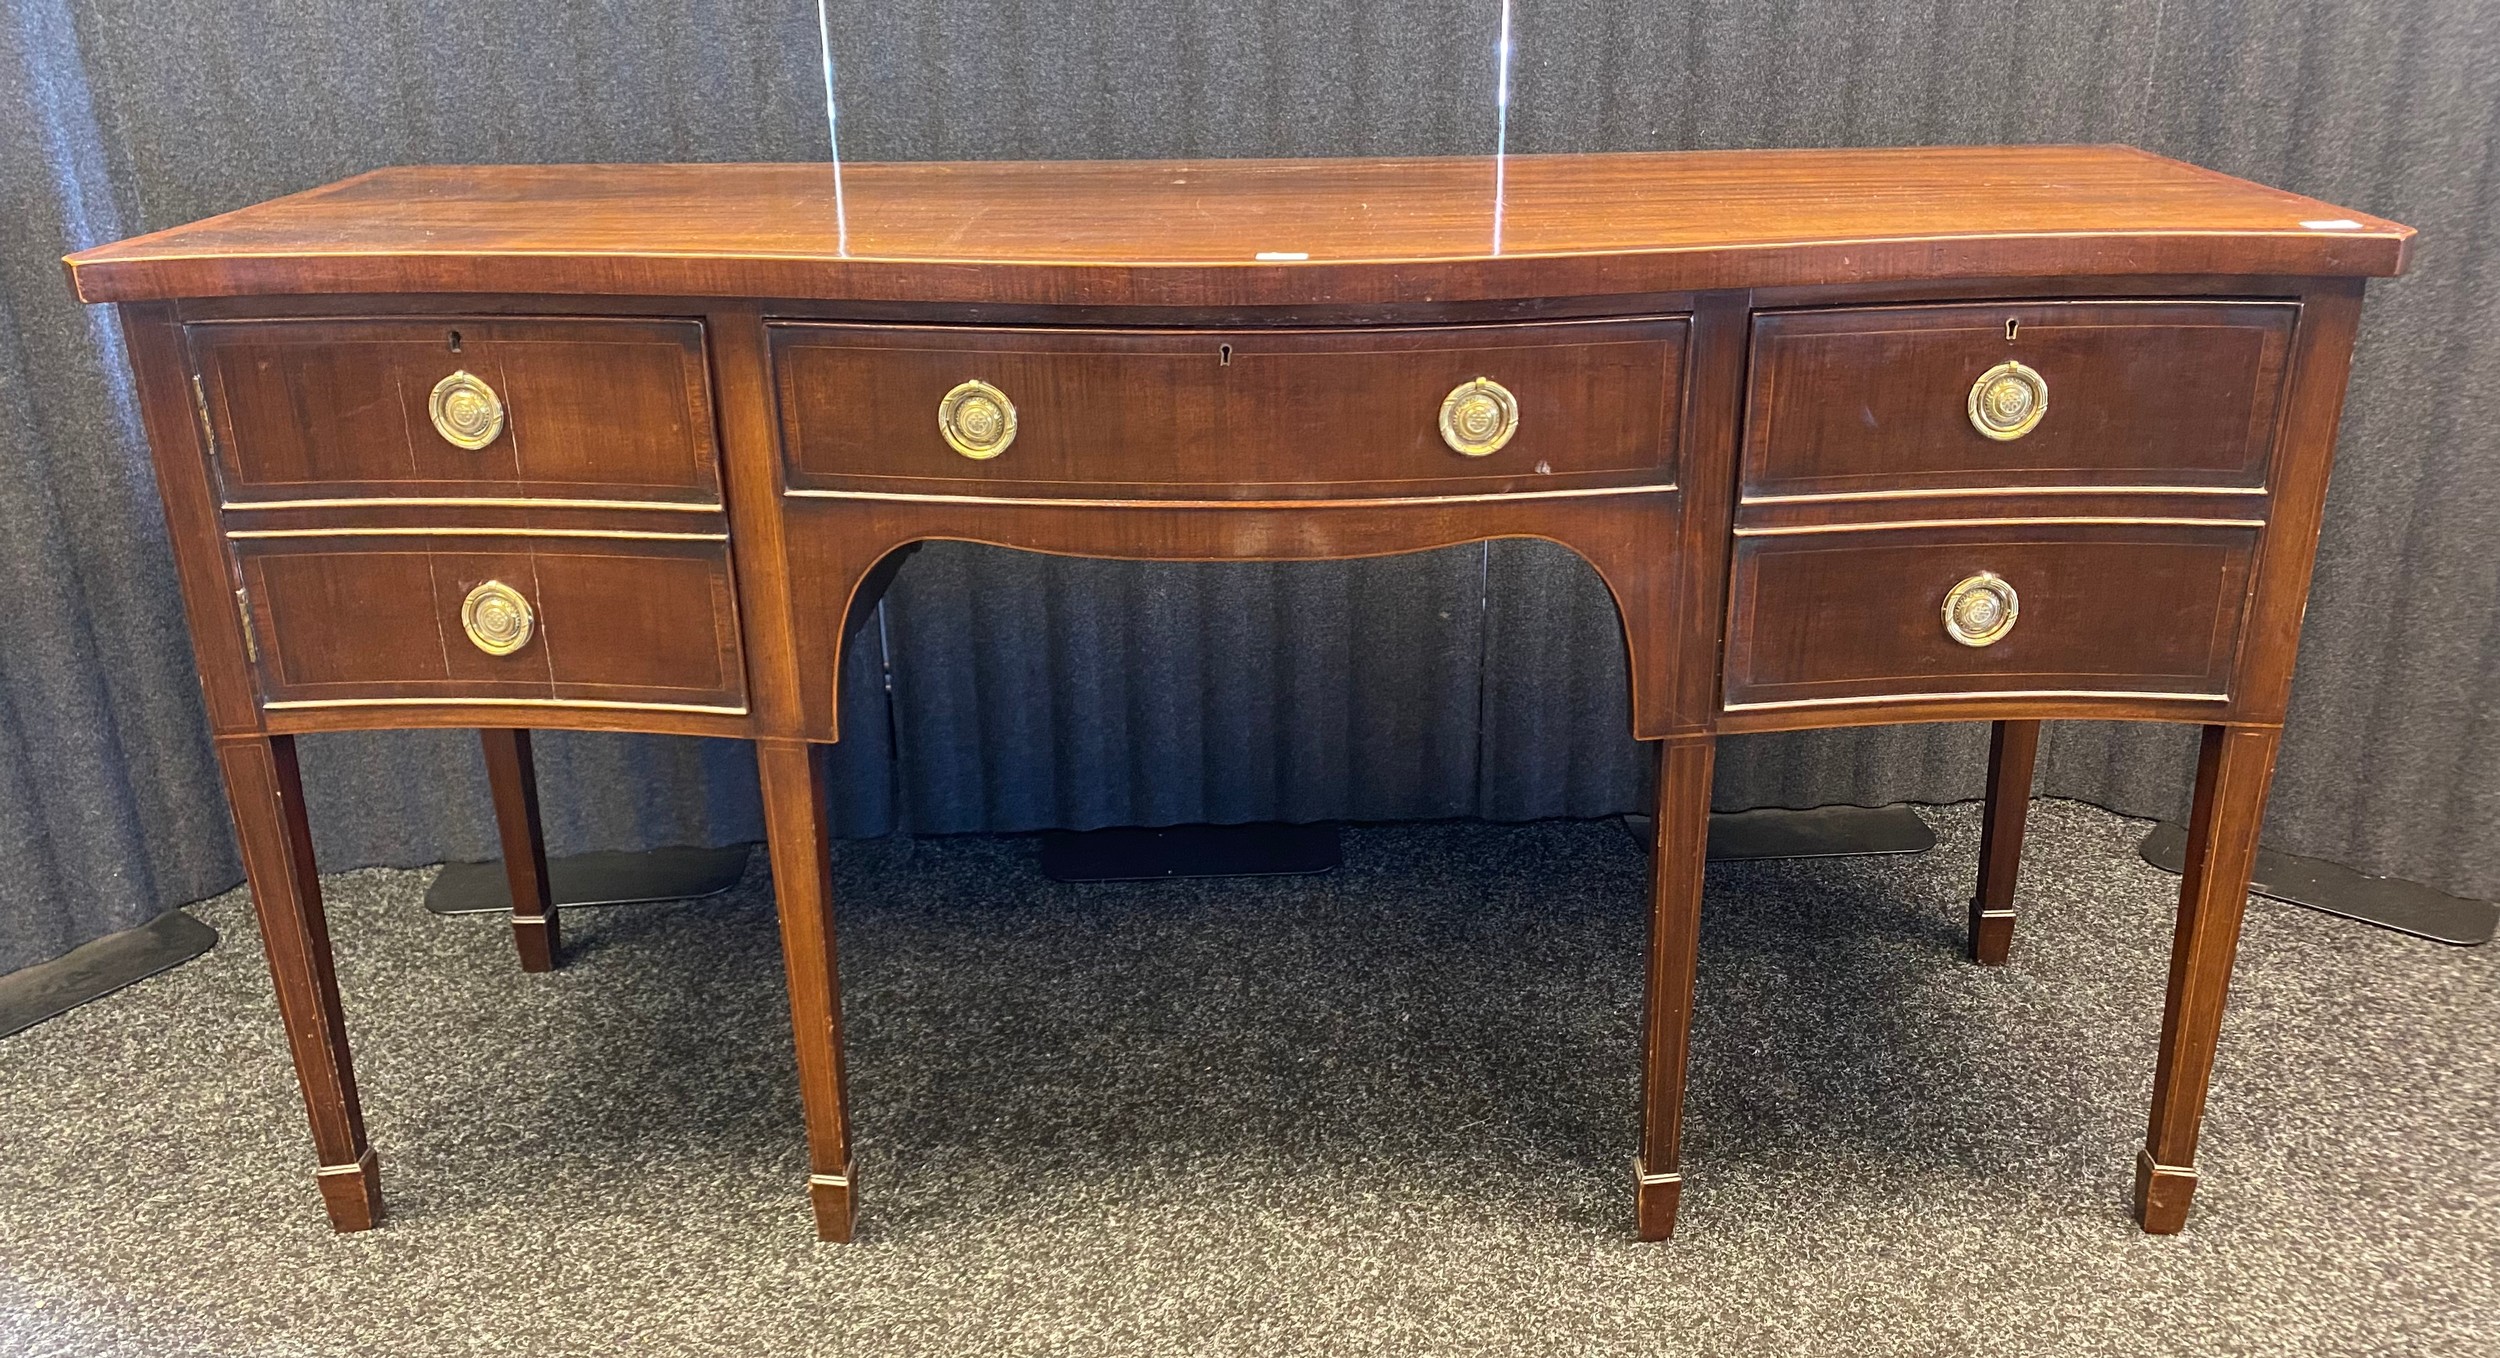 19th century Georgian style, Mahogany serpentine front sideboard- fitted with brass round handles.